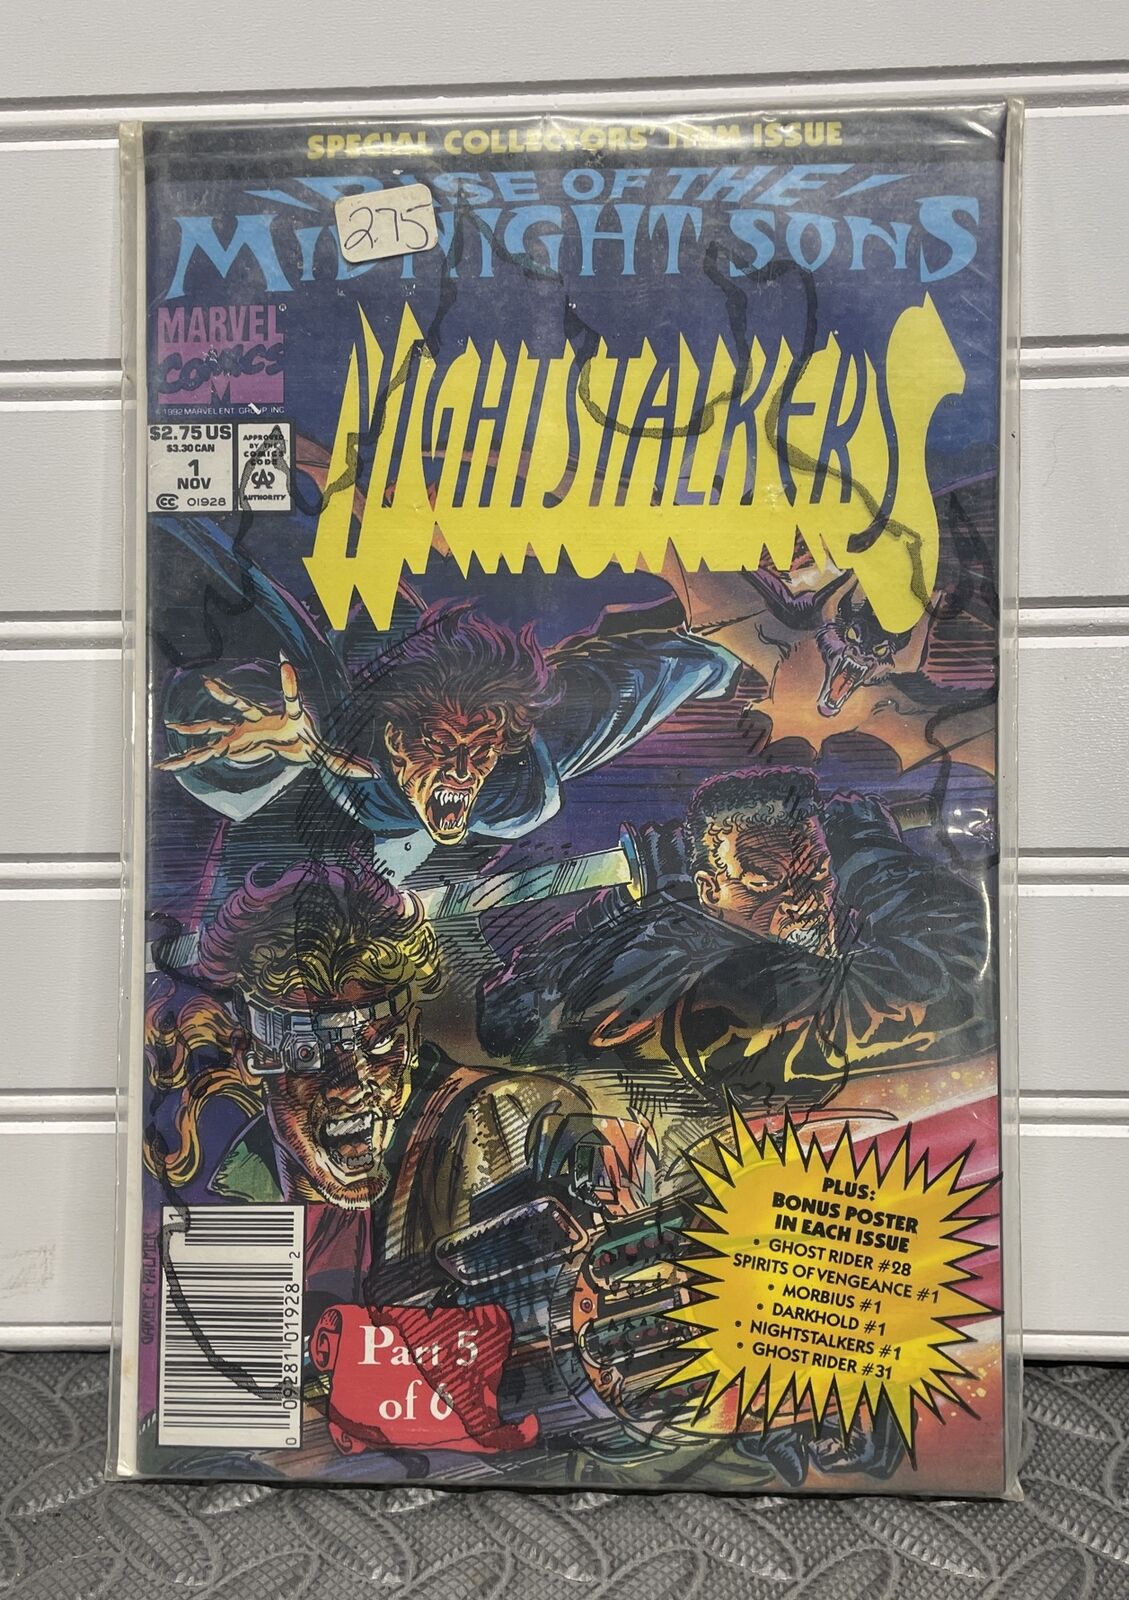 Marvel Comics Nightstalkers #1 Rise of the Midnight Sons pt 5